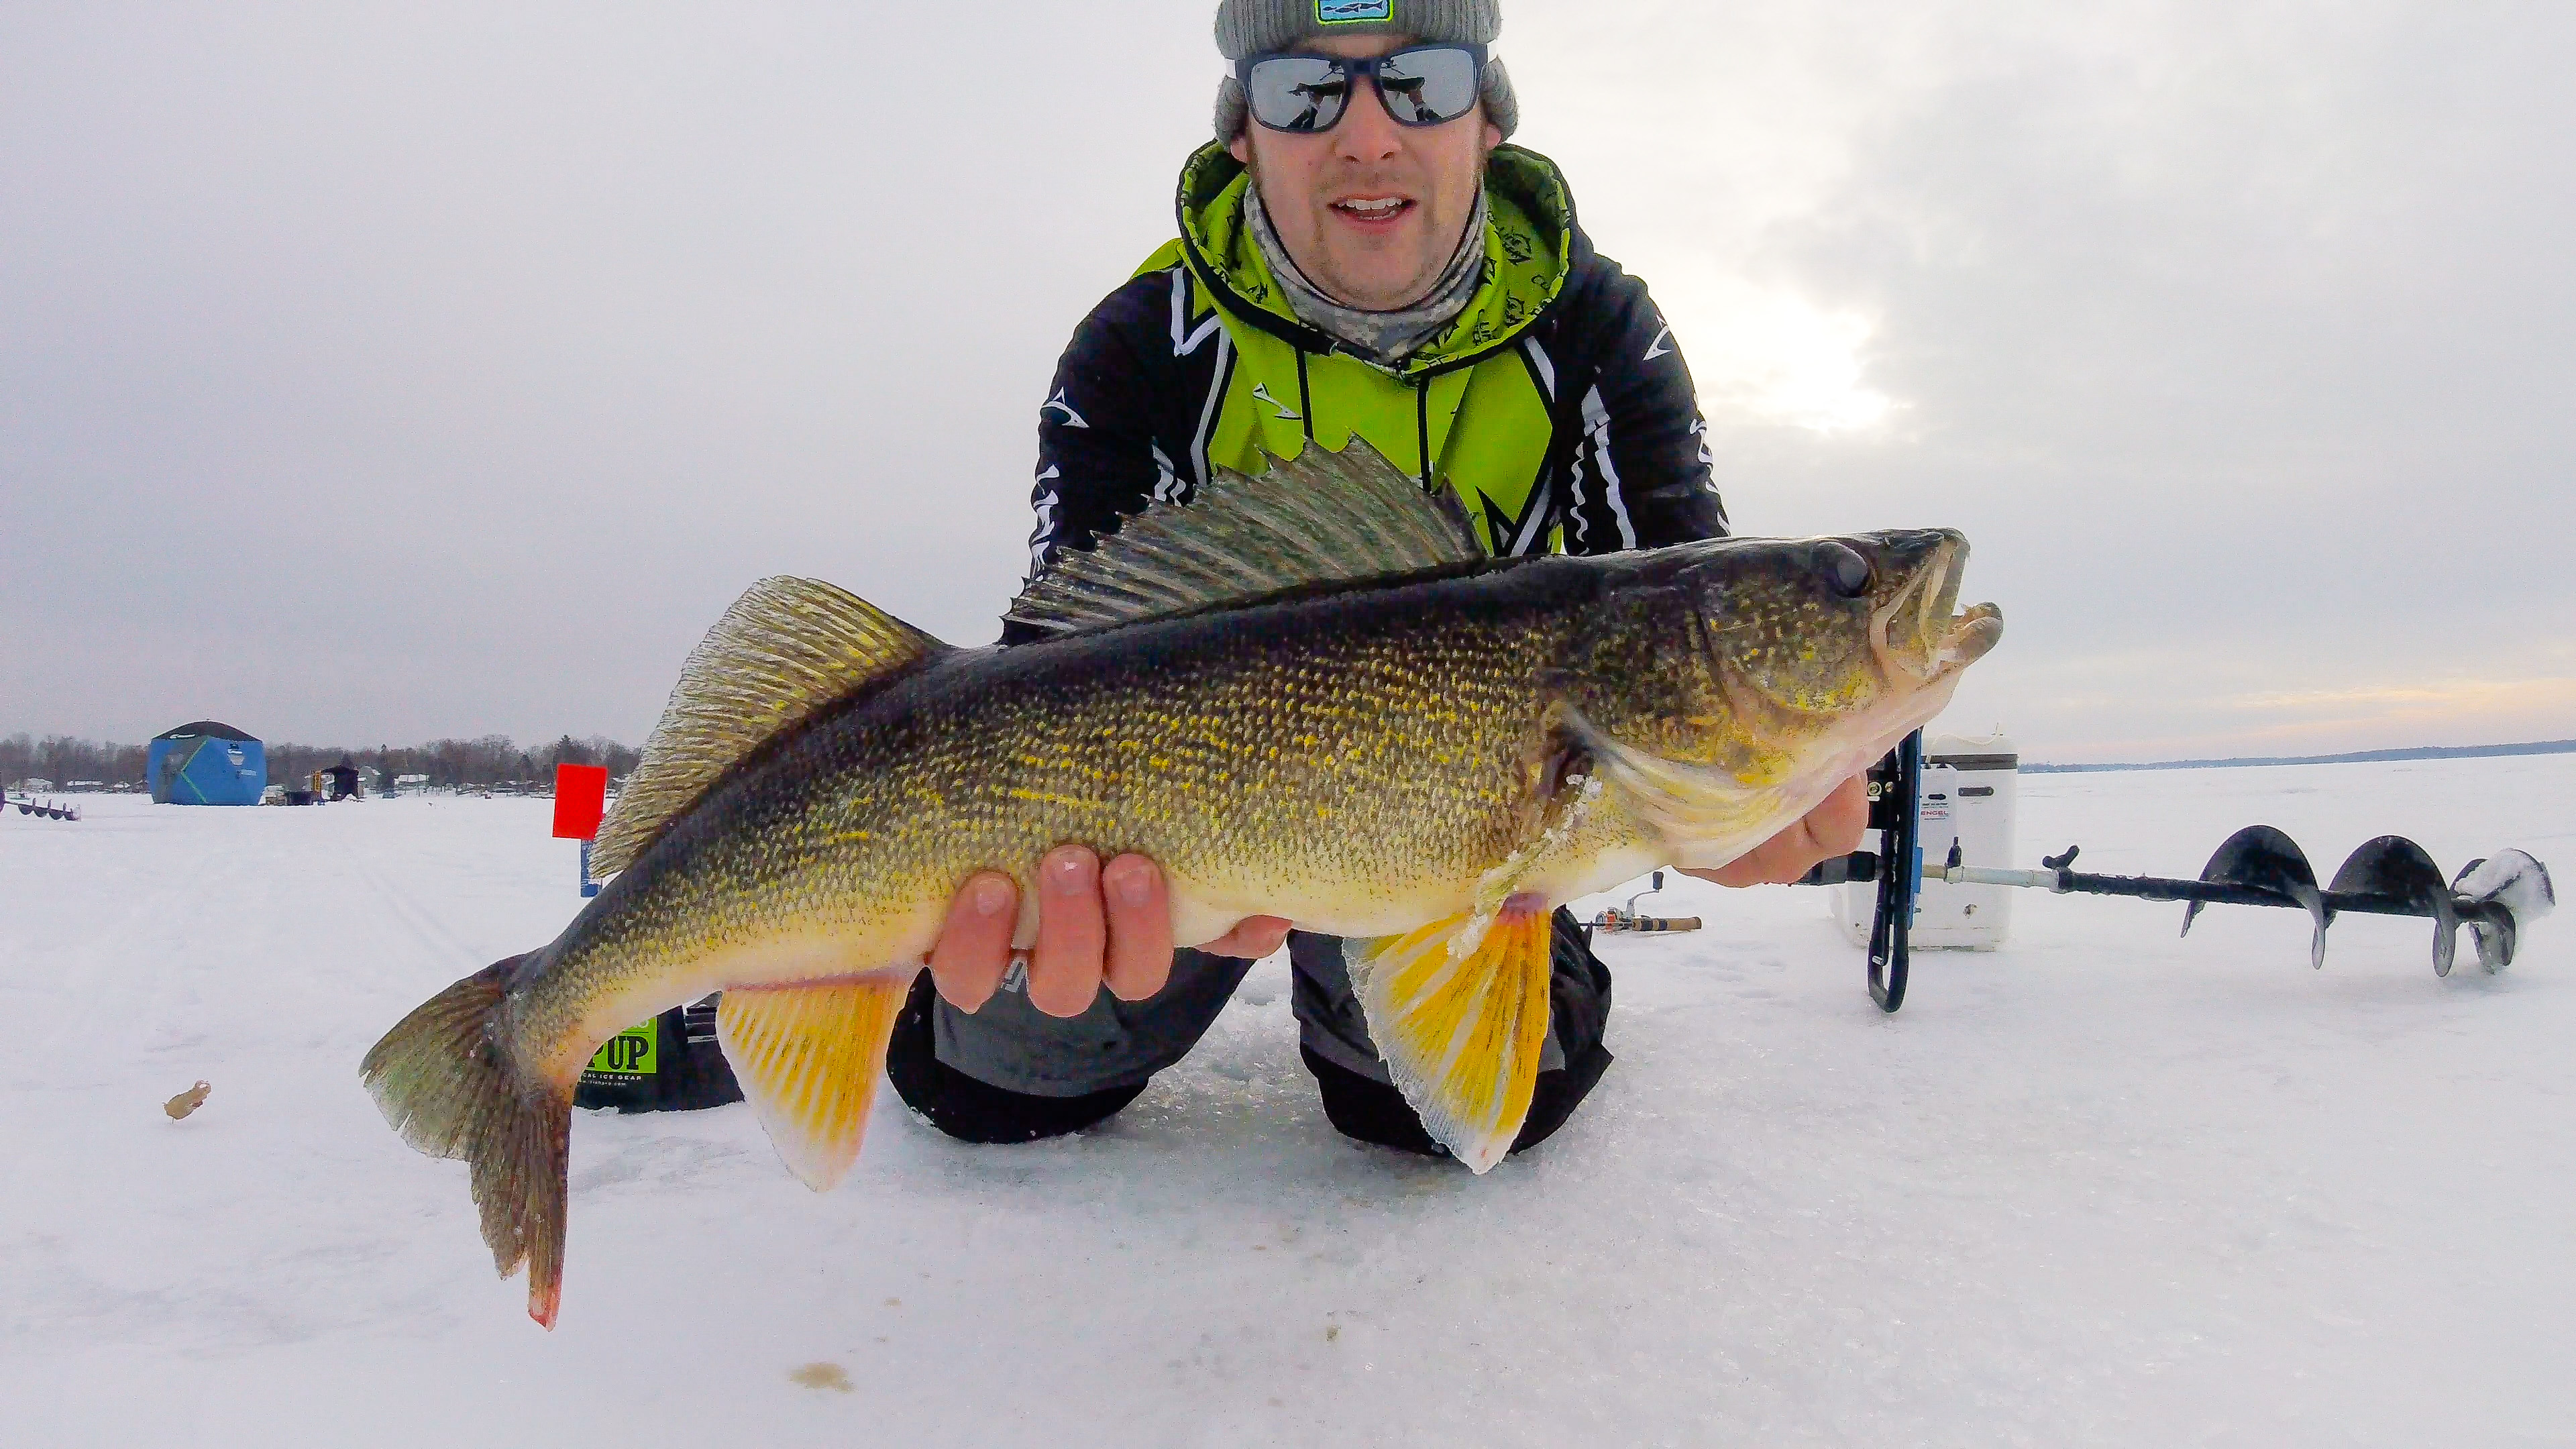 First Fish of 2019 on Mille Lacs - Ice Fishing Forum - Ice Fishing Forum